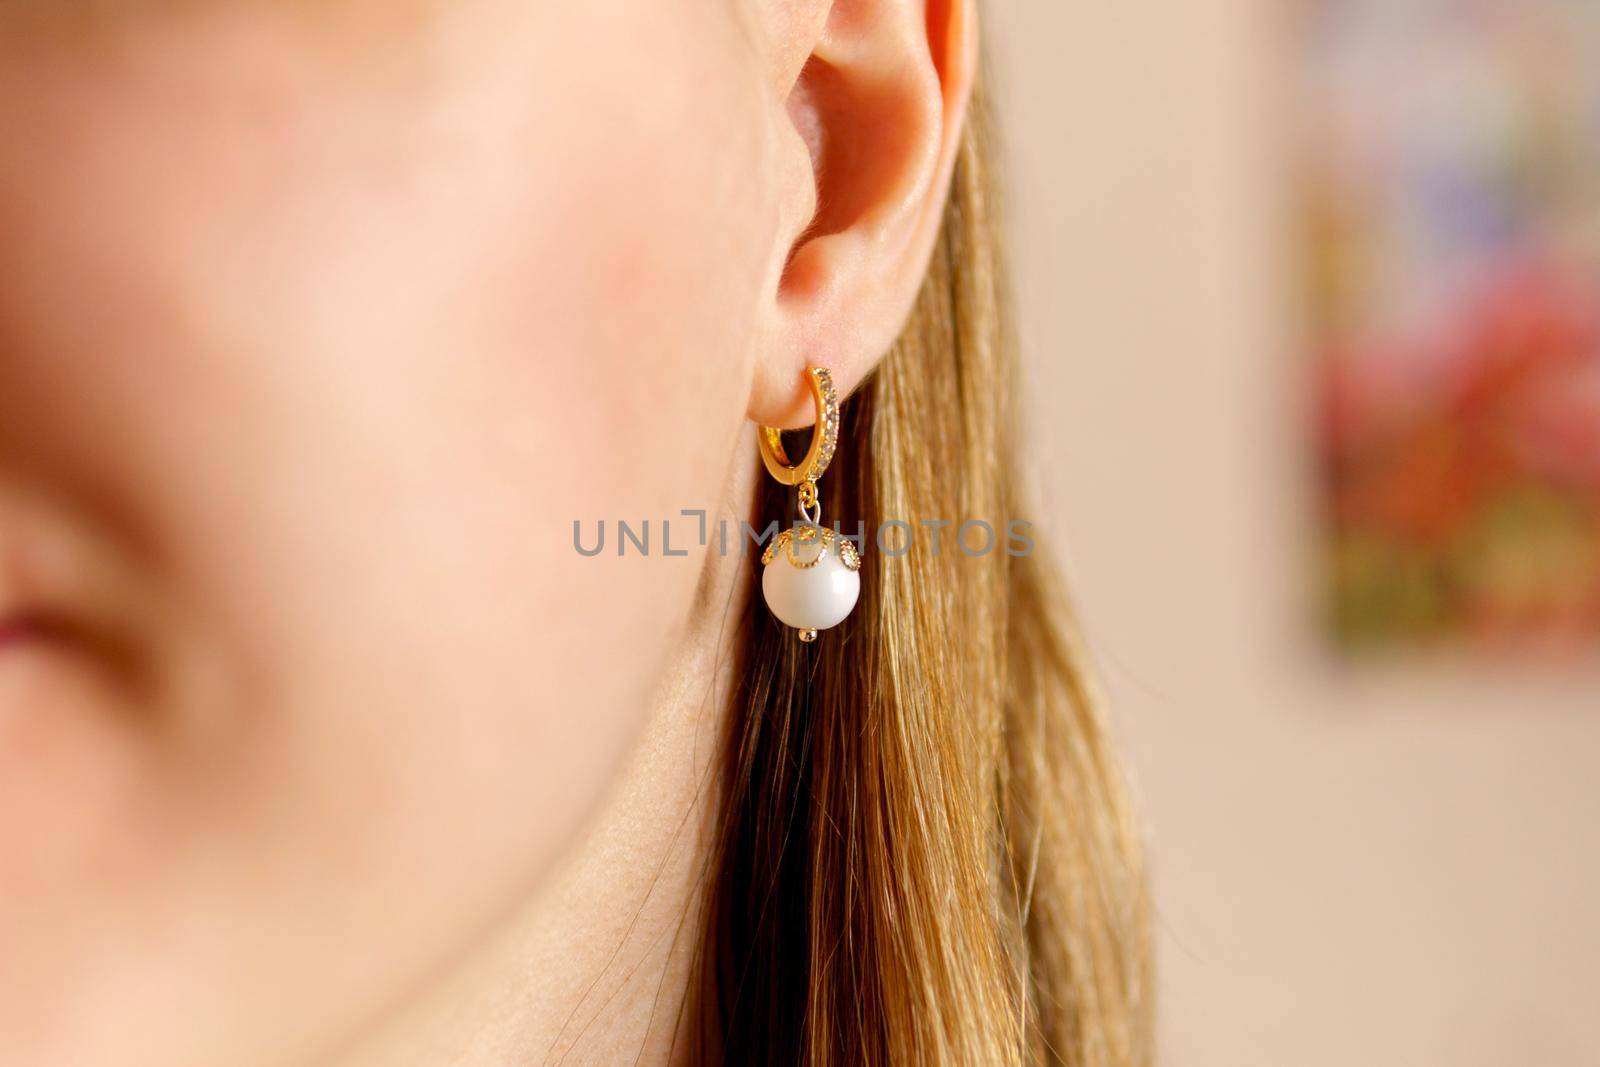 Earrings made of gold. Handmade jewelry made of natural stones.